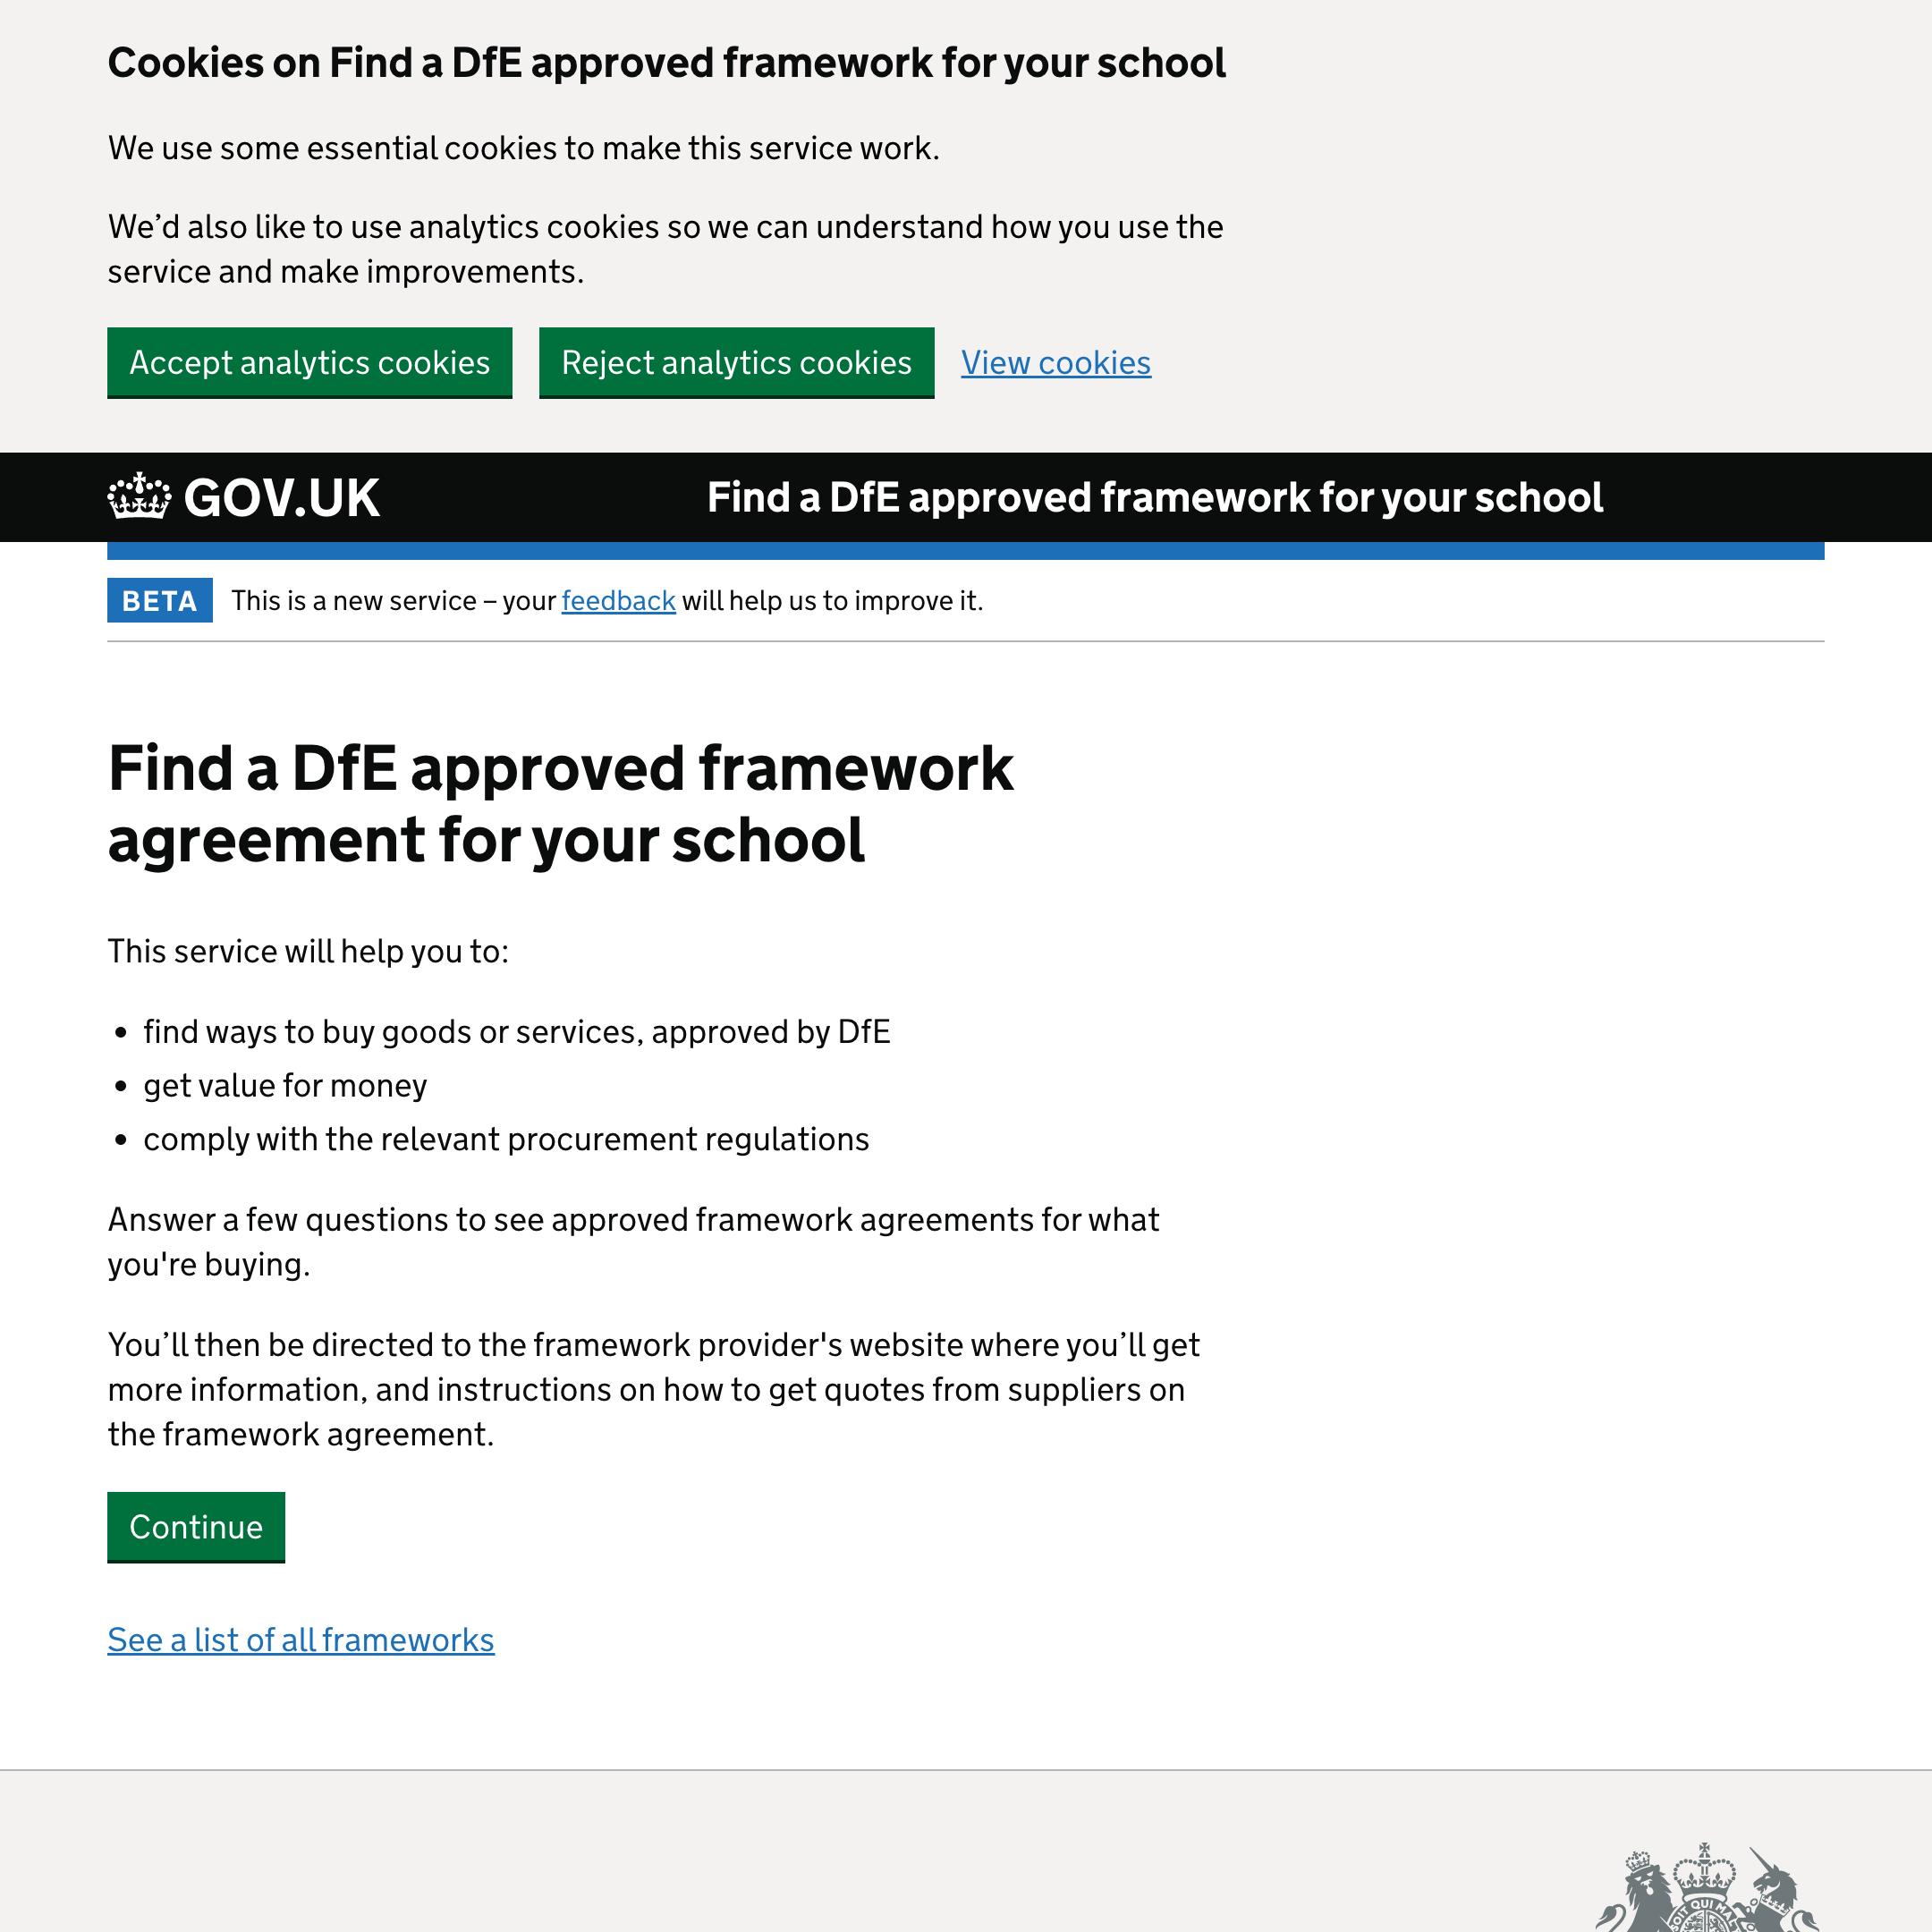 Find a DfE-approved framework for your school